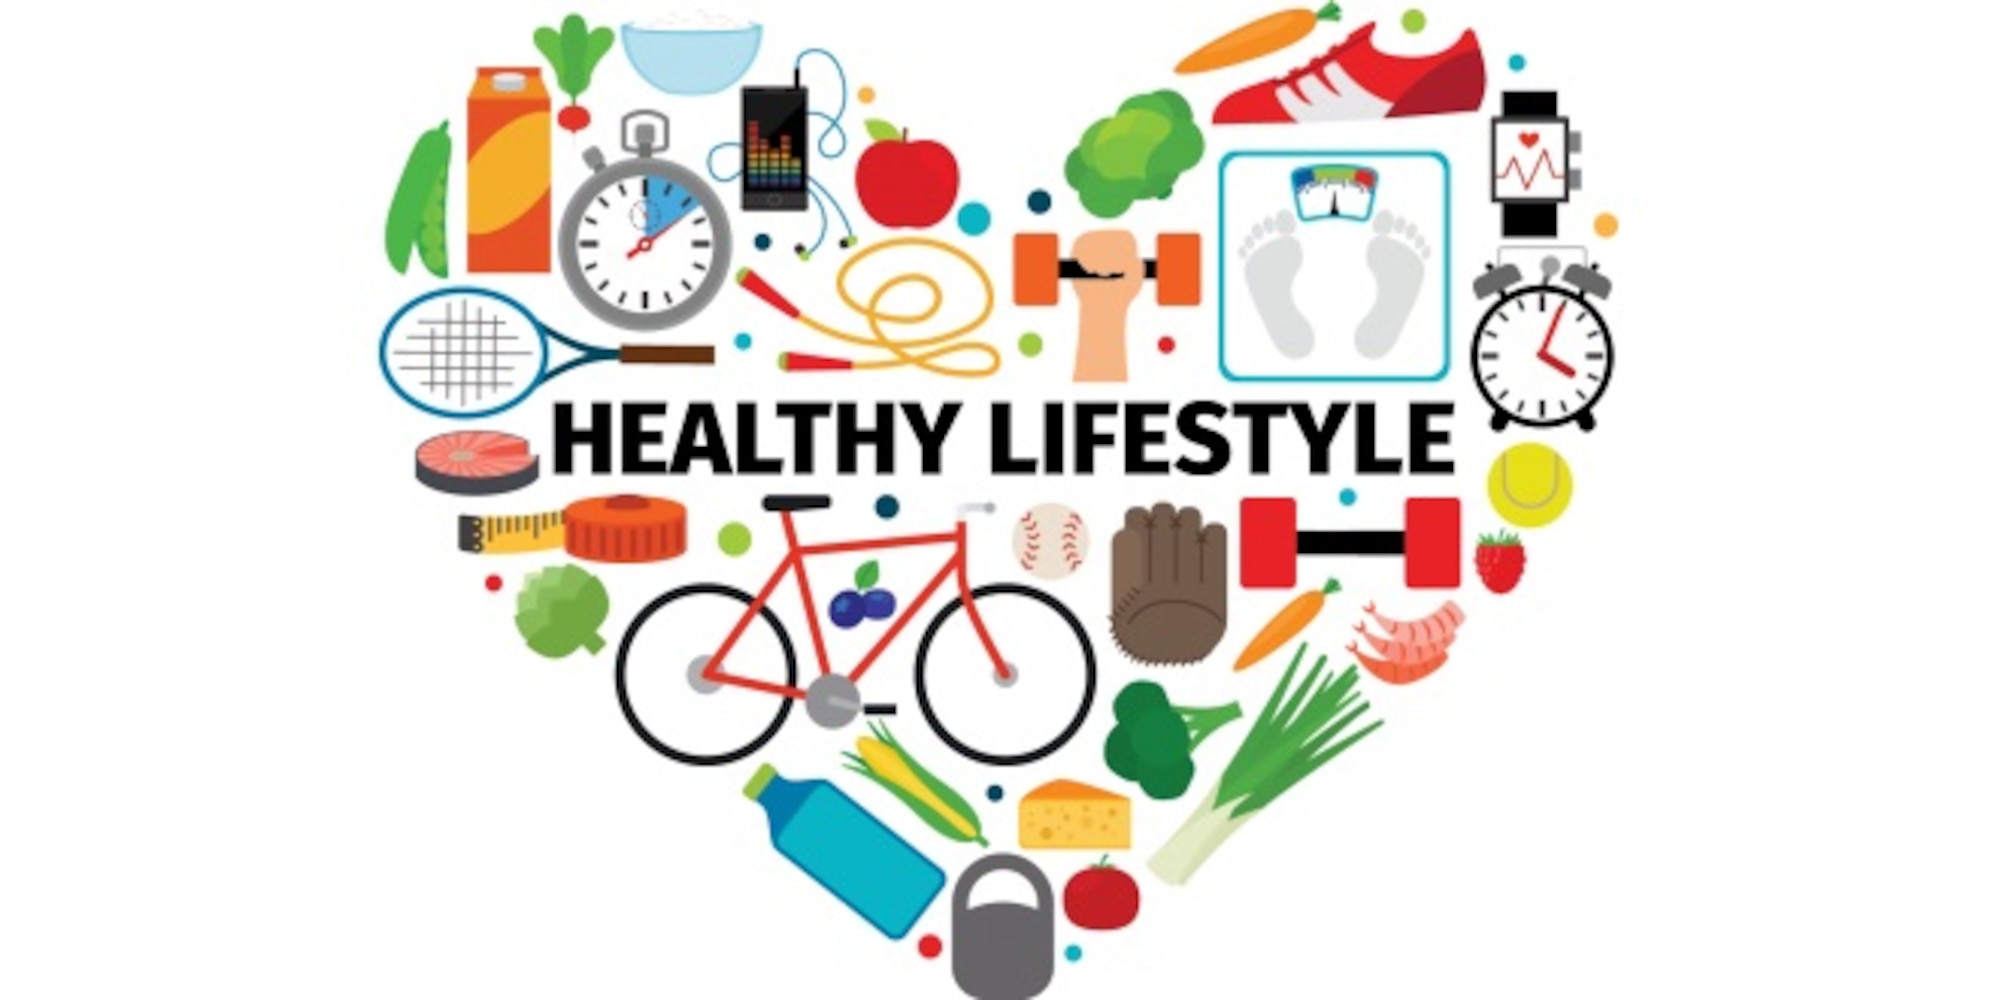 Combining healthy diet, exercise and sleep habits is the key to an overall healthful lifestyle, something that is paramount in many people’s minds during the ongoing pandemic.